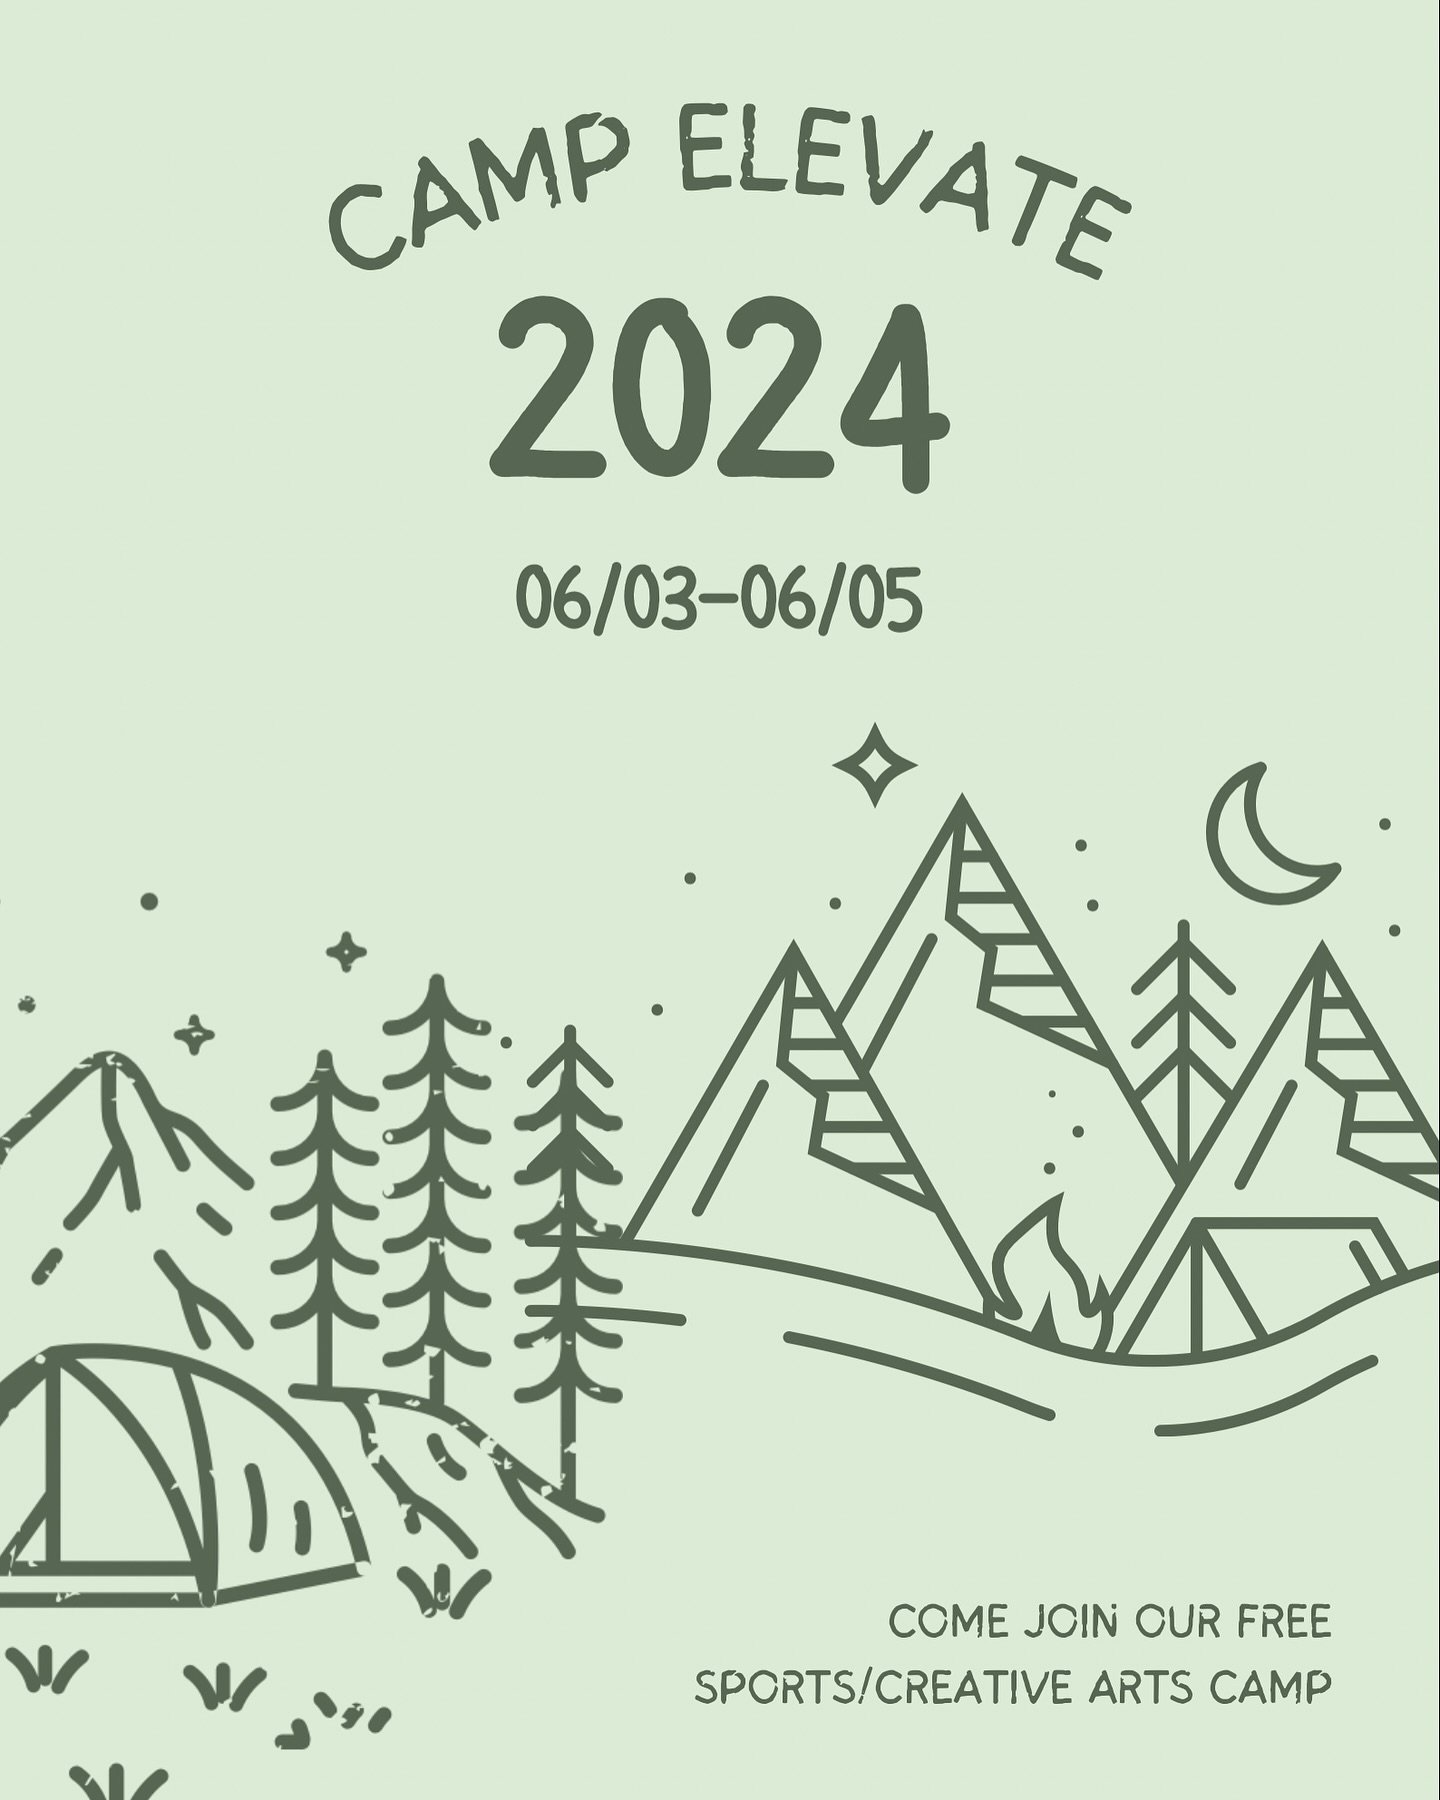 CAMP ELEVATE IS ALMOST HERE! June 3-5 We are holding a FREE sports and creative arts camp for grades K-8! Sign Up on our website where you can also see more details!